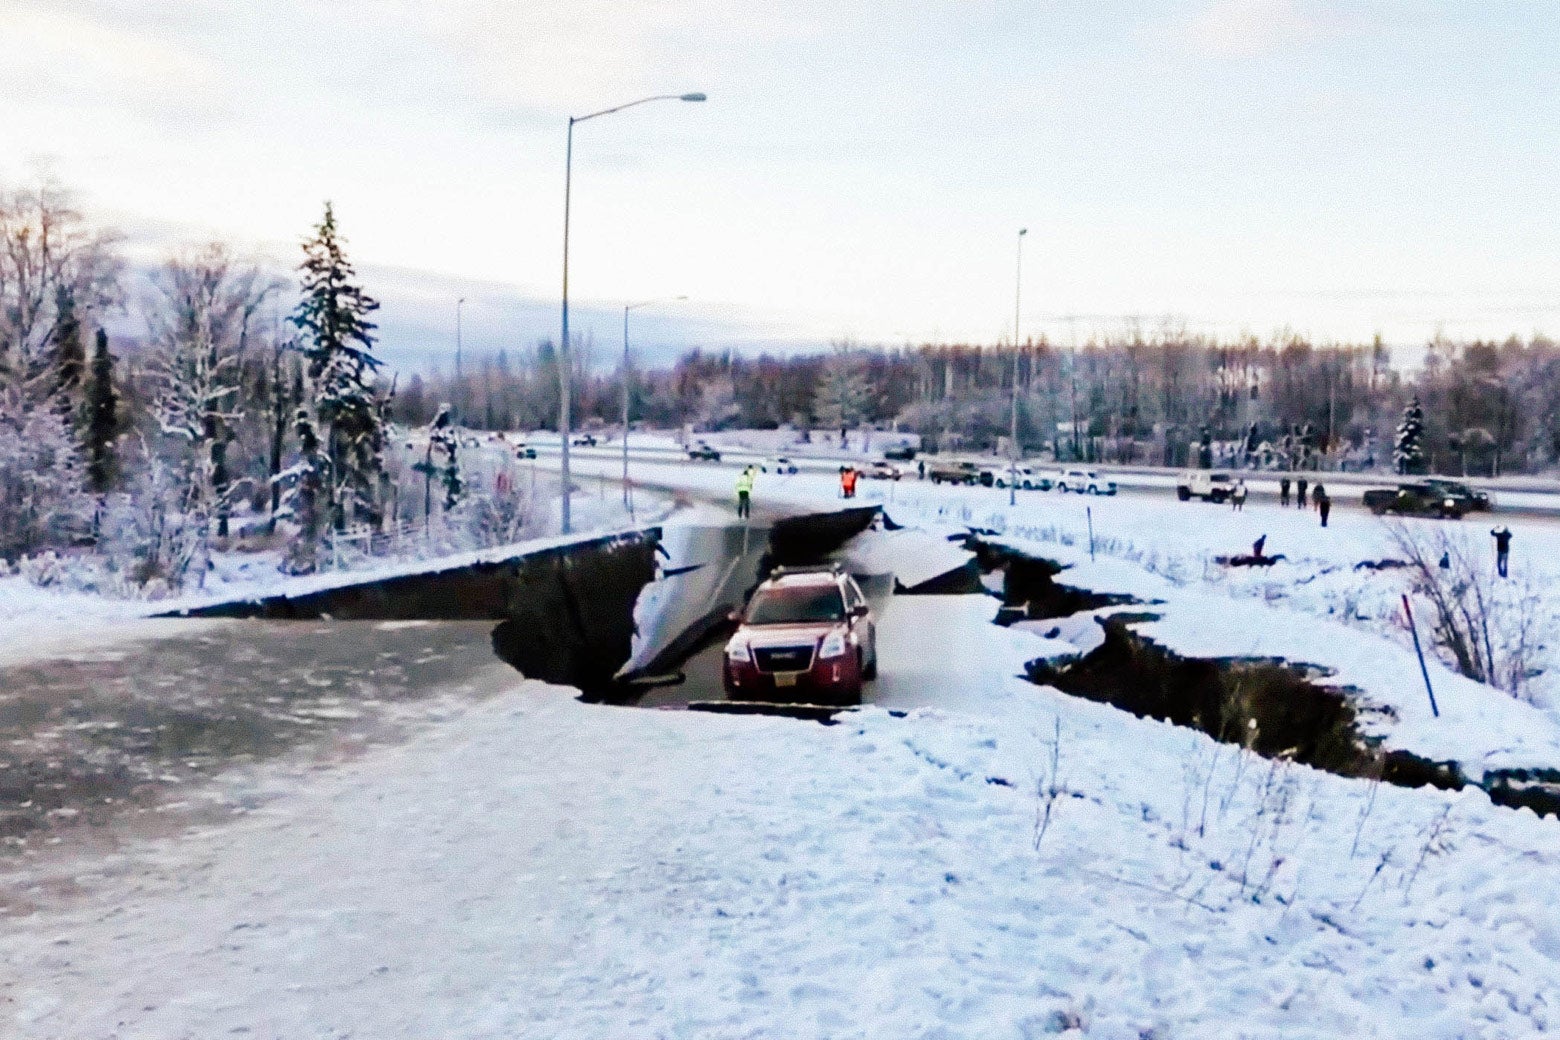 A crevasse splits a road off a snowy highway, with one car stuck in a depression